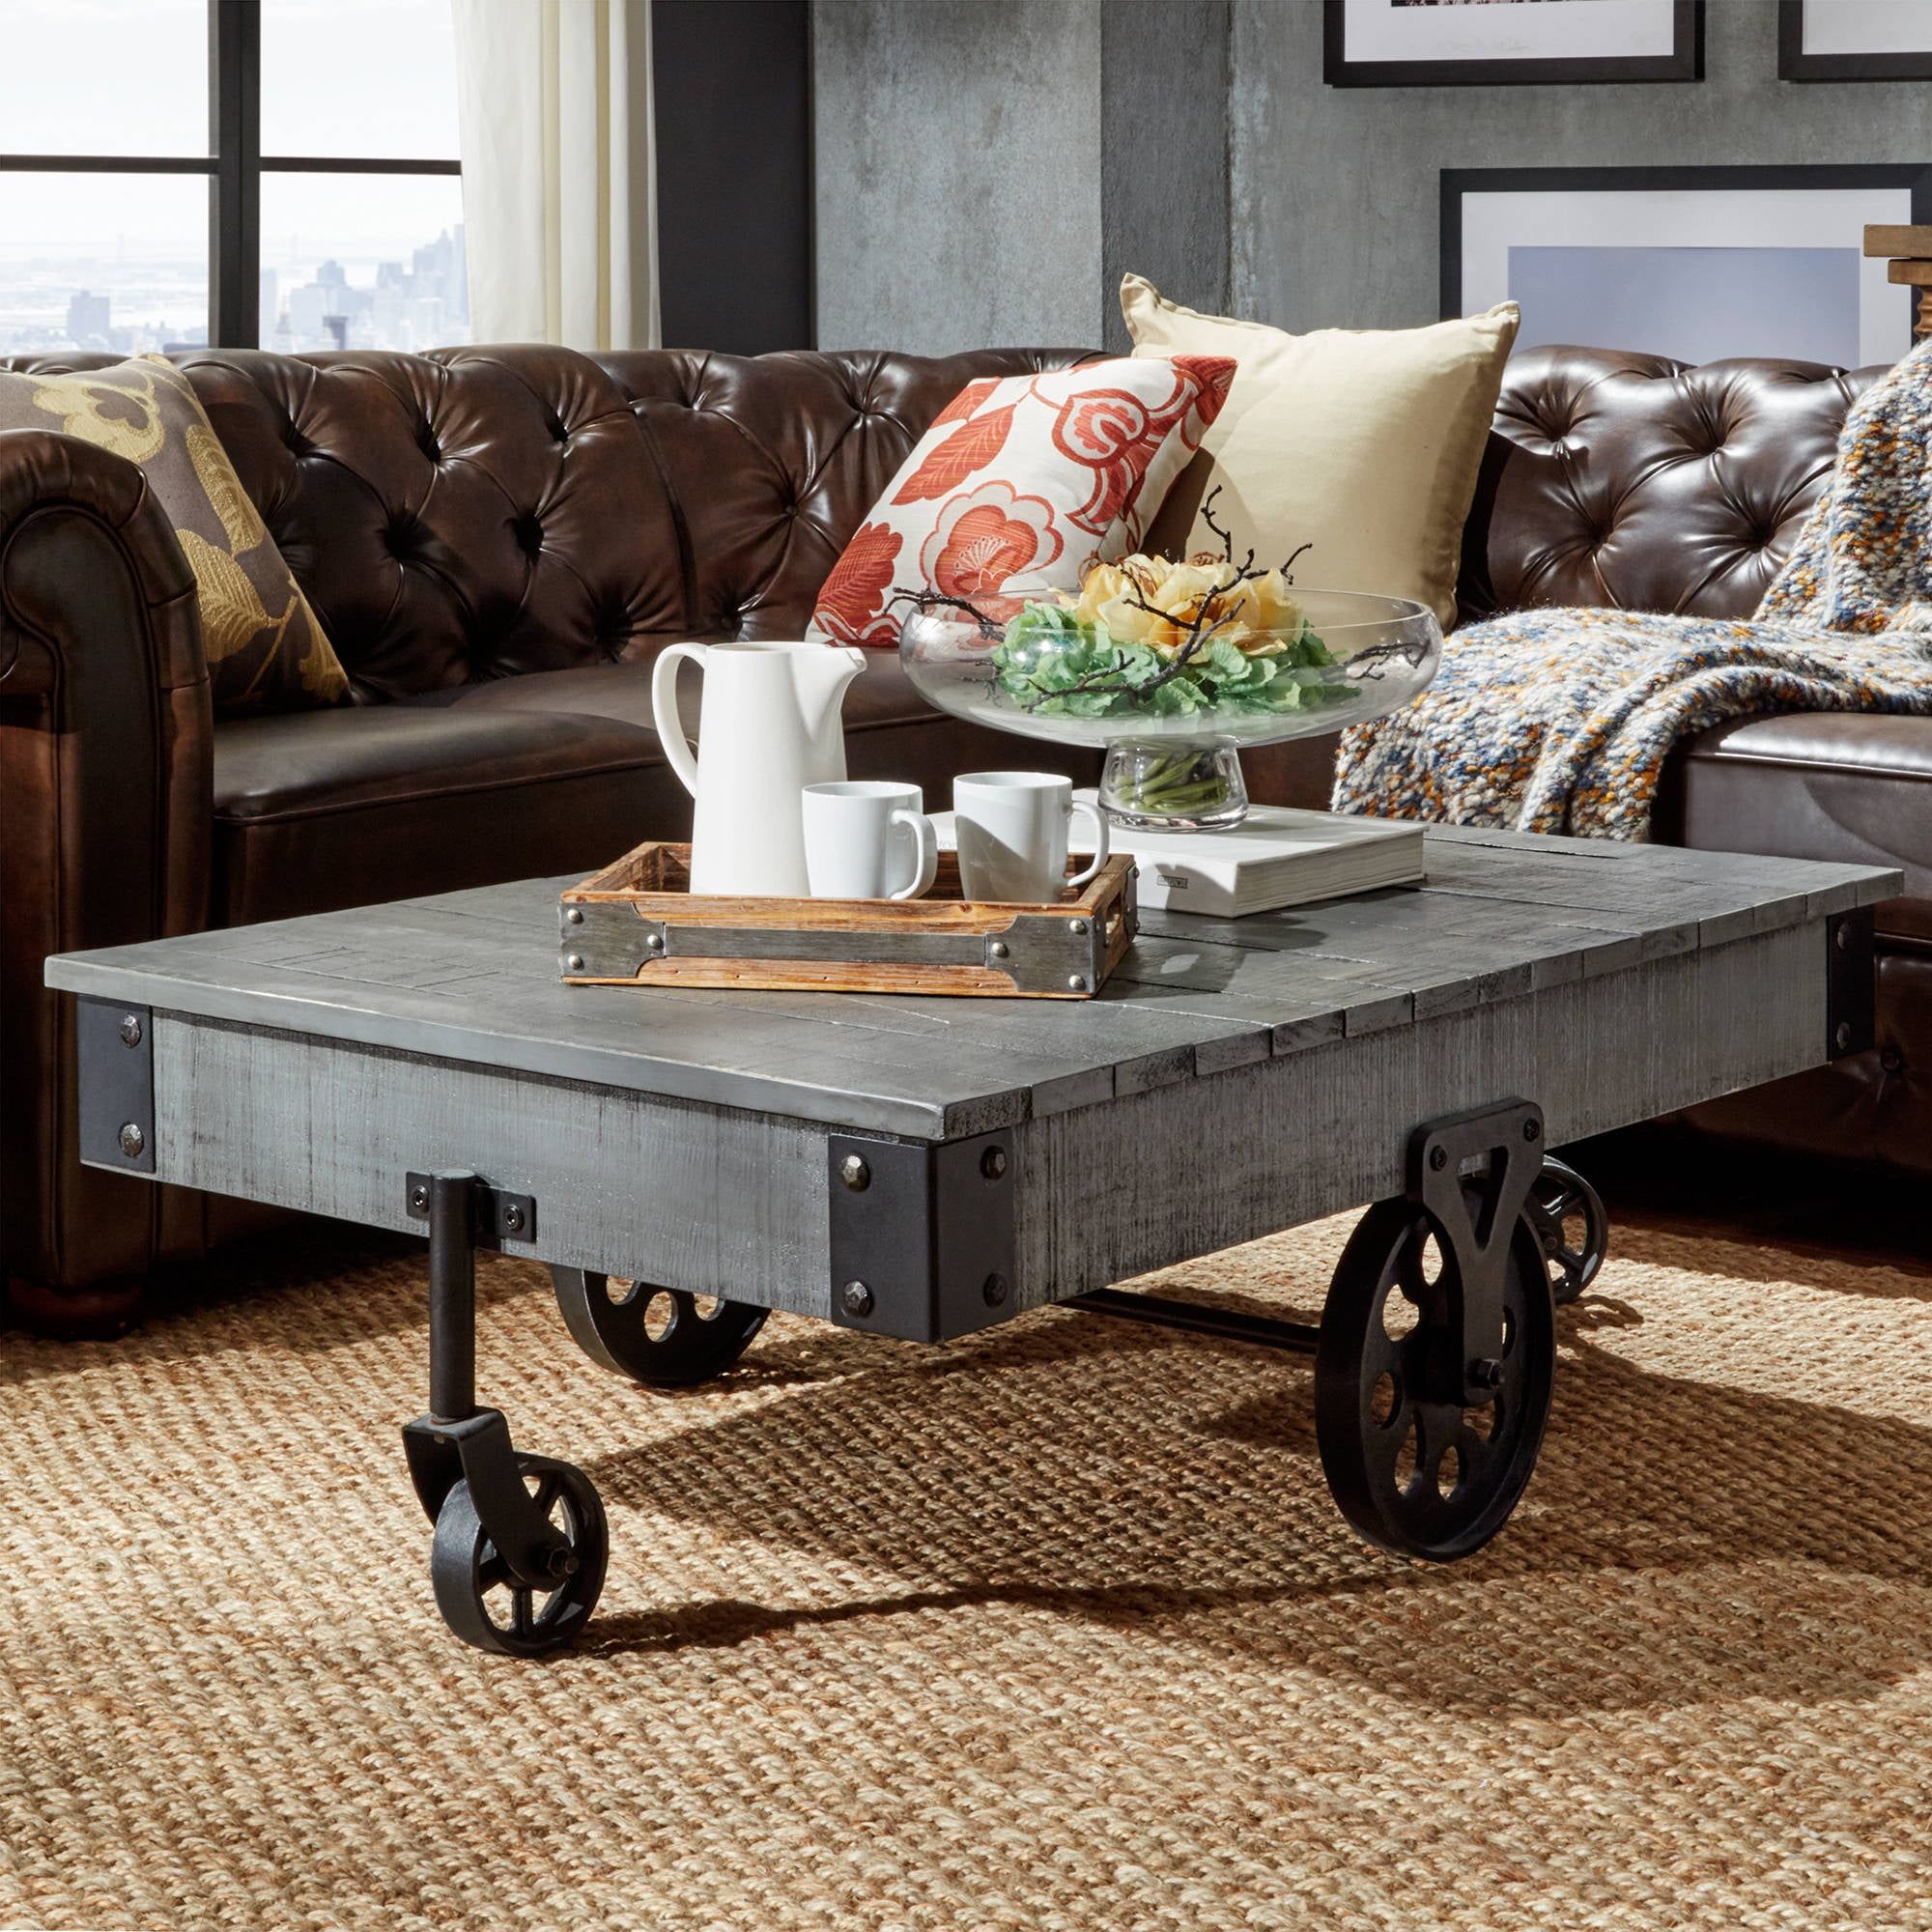 Weston Home Metal Supports Cocktail Table With Functional Wheels, Grey Regarding Gray Coastal Cocktail Tables (View 9 of 22)